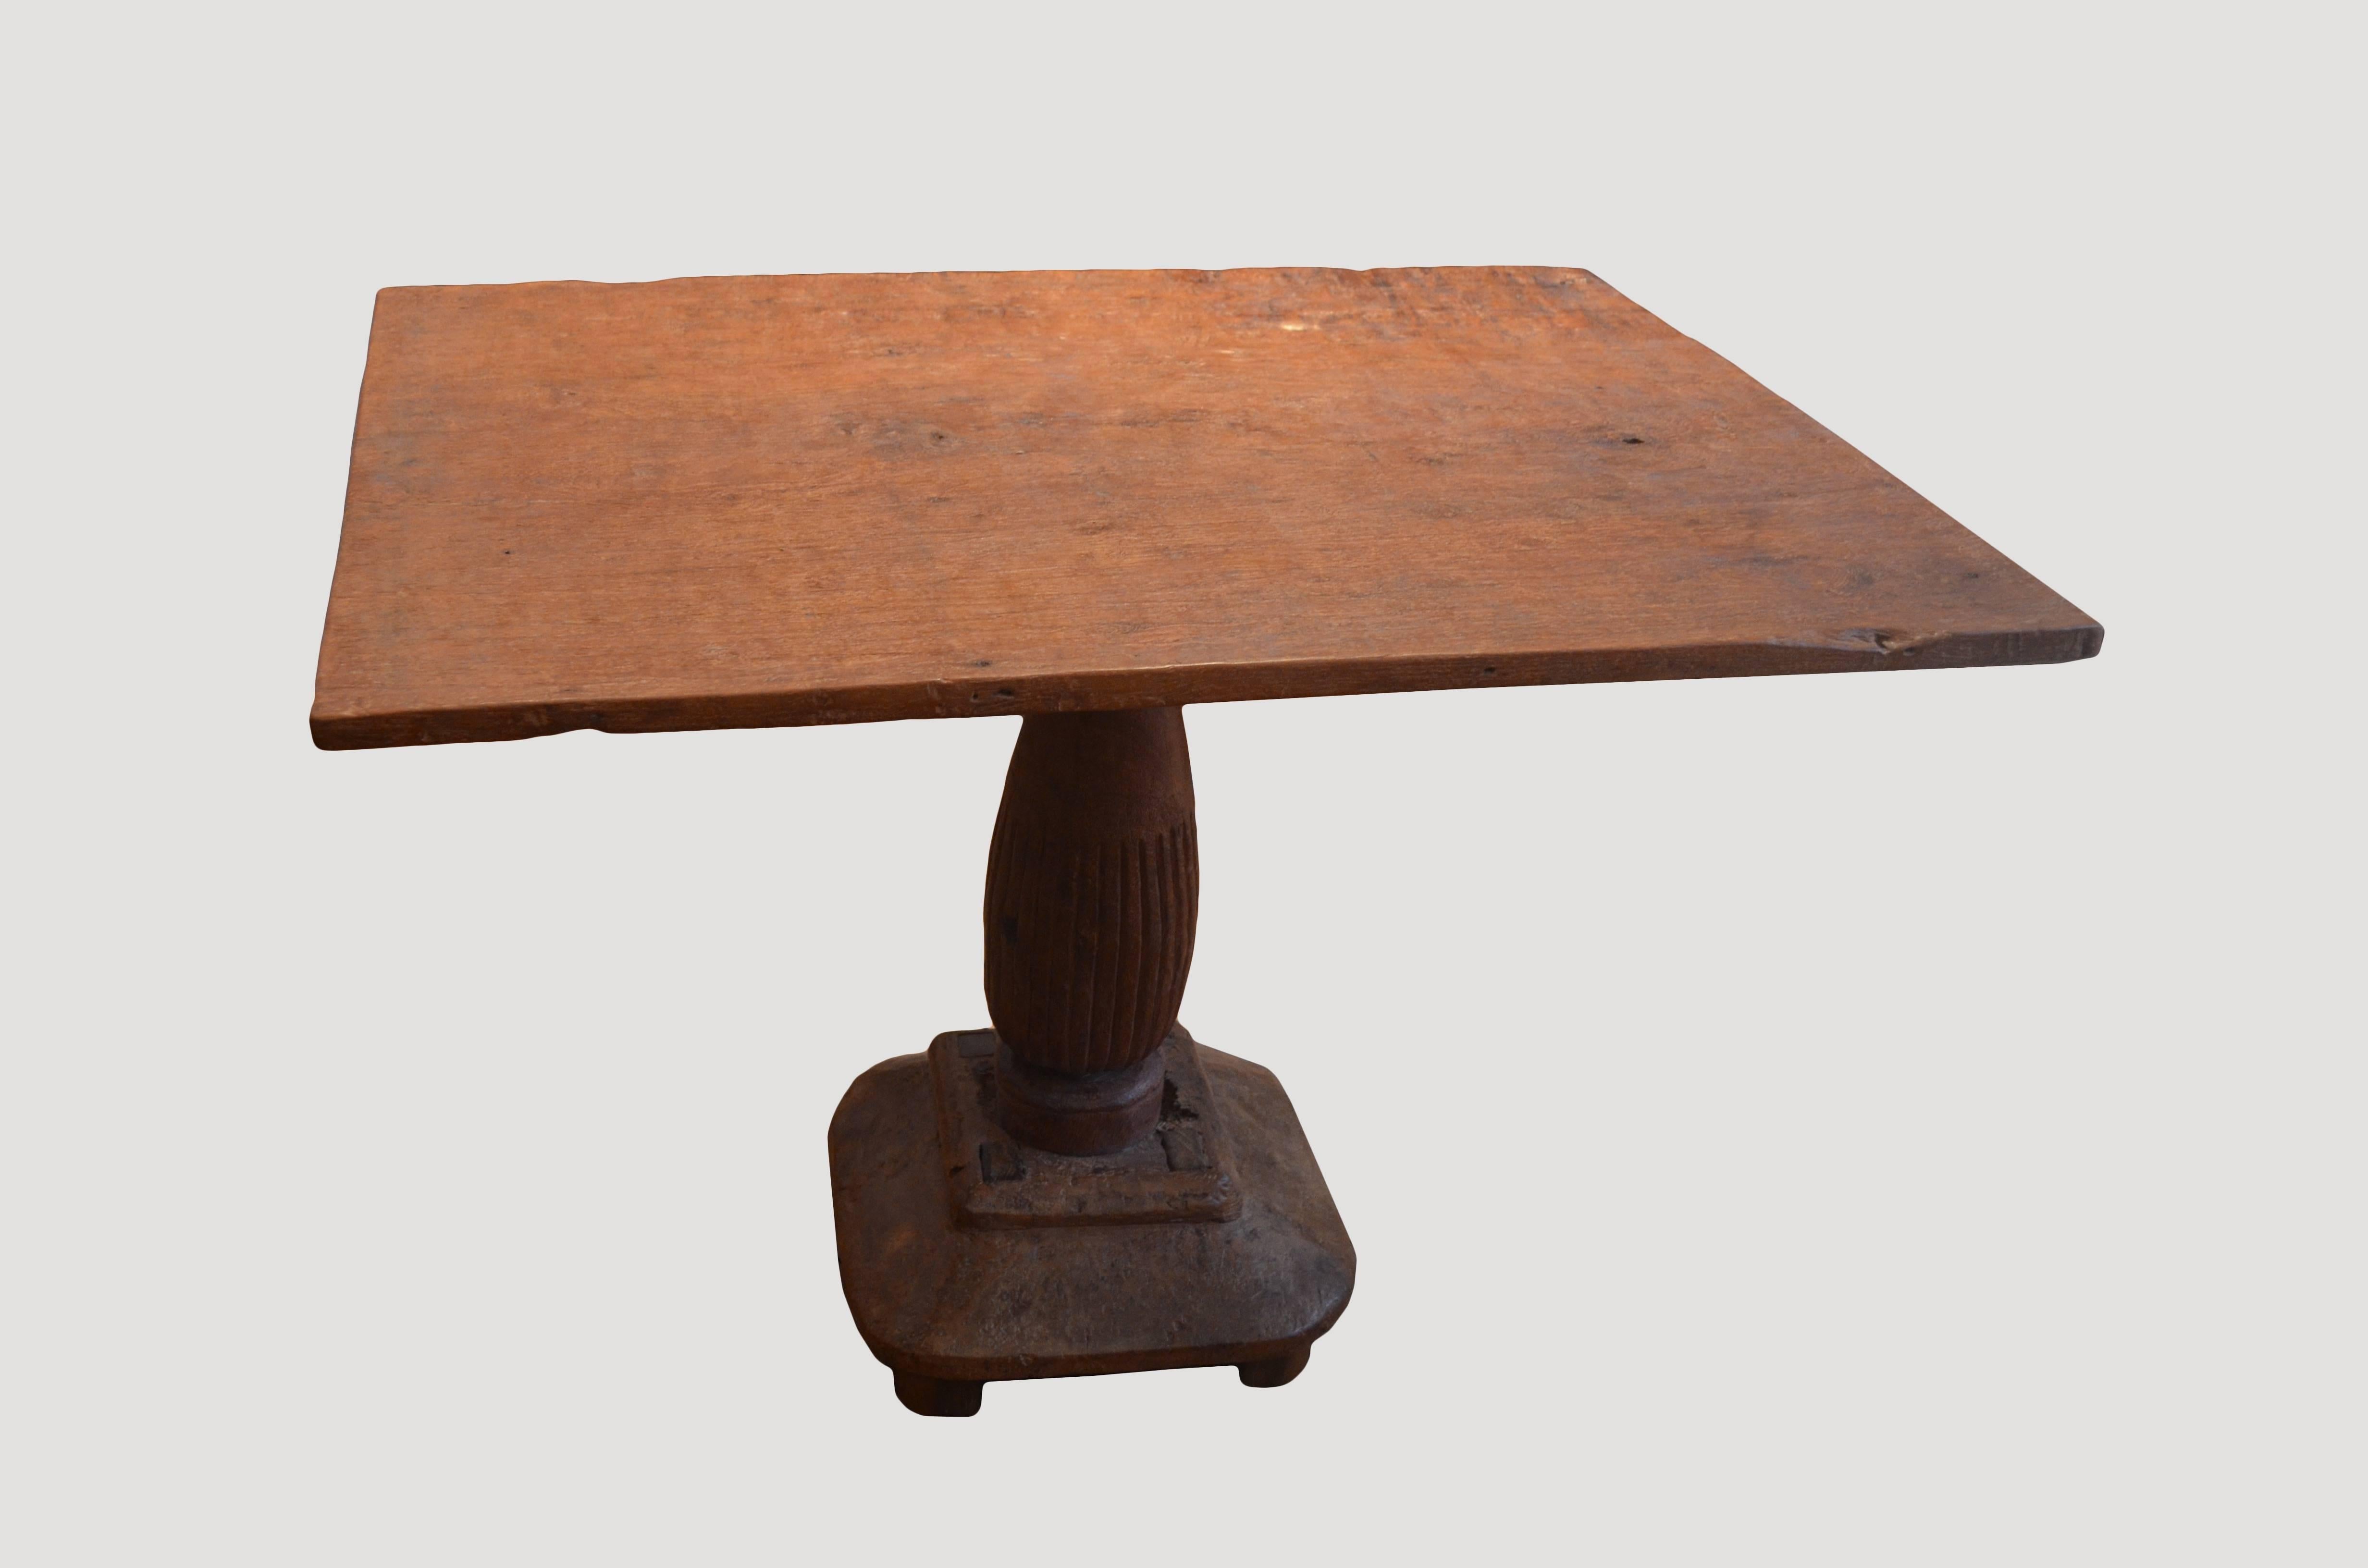 Fabulous single slab top teak wood table, perfect for intimate dining or a large side table. Beautiful hand-carved colonial leg.

This table was sourced in the spirit of wabi-sabi, a Japanese philosophy that beauty can be found in imperfection and